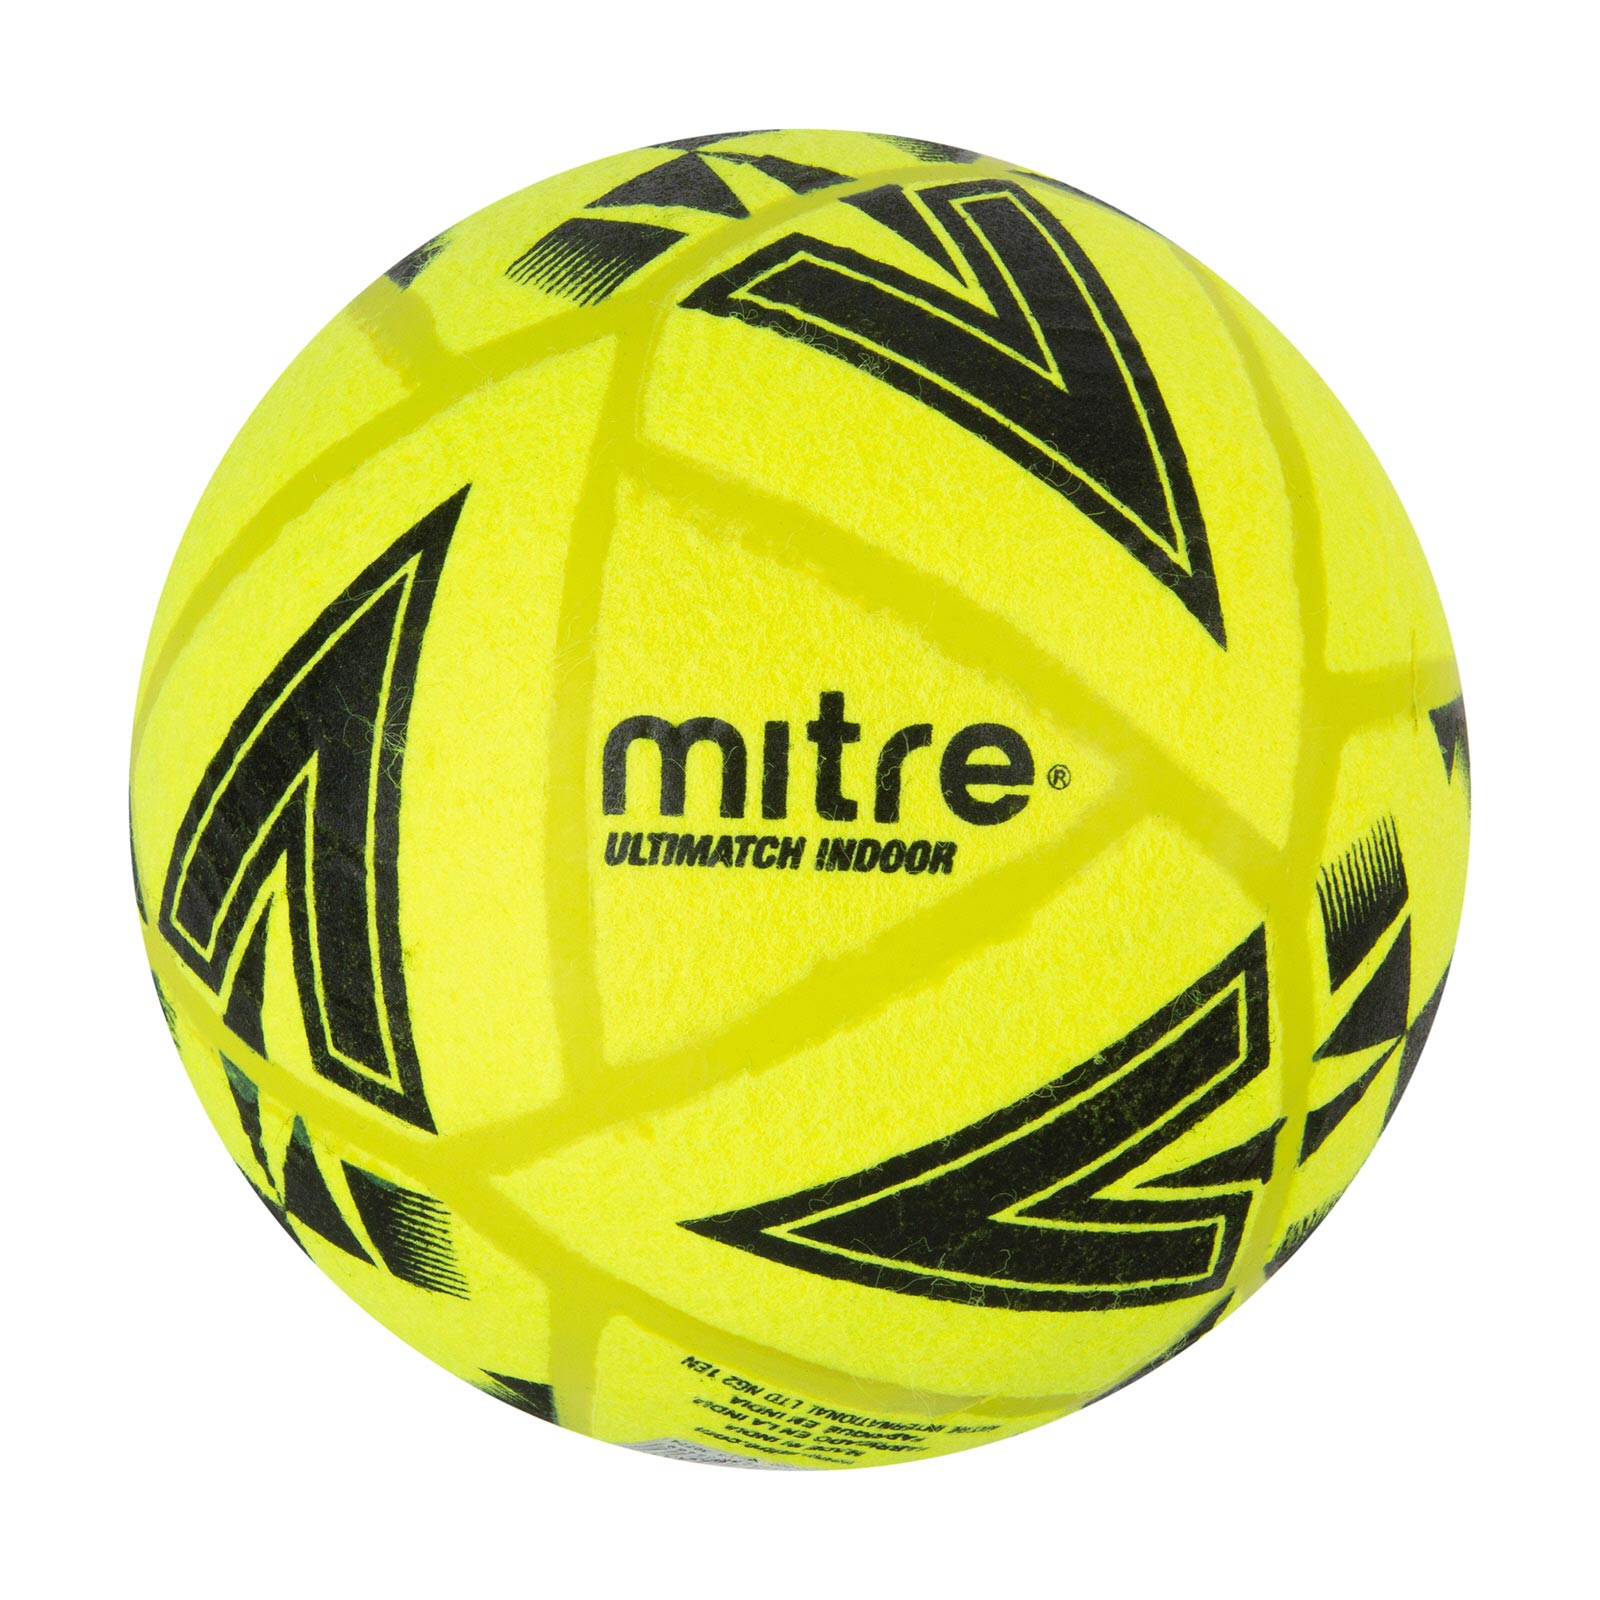 MITRE ULTIMATCH INDOOR BALL - SIZE 5